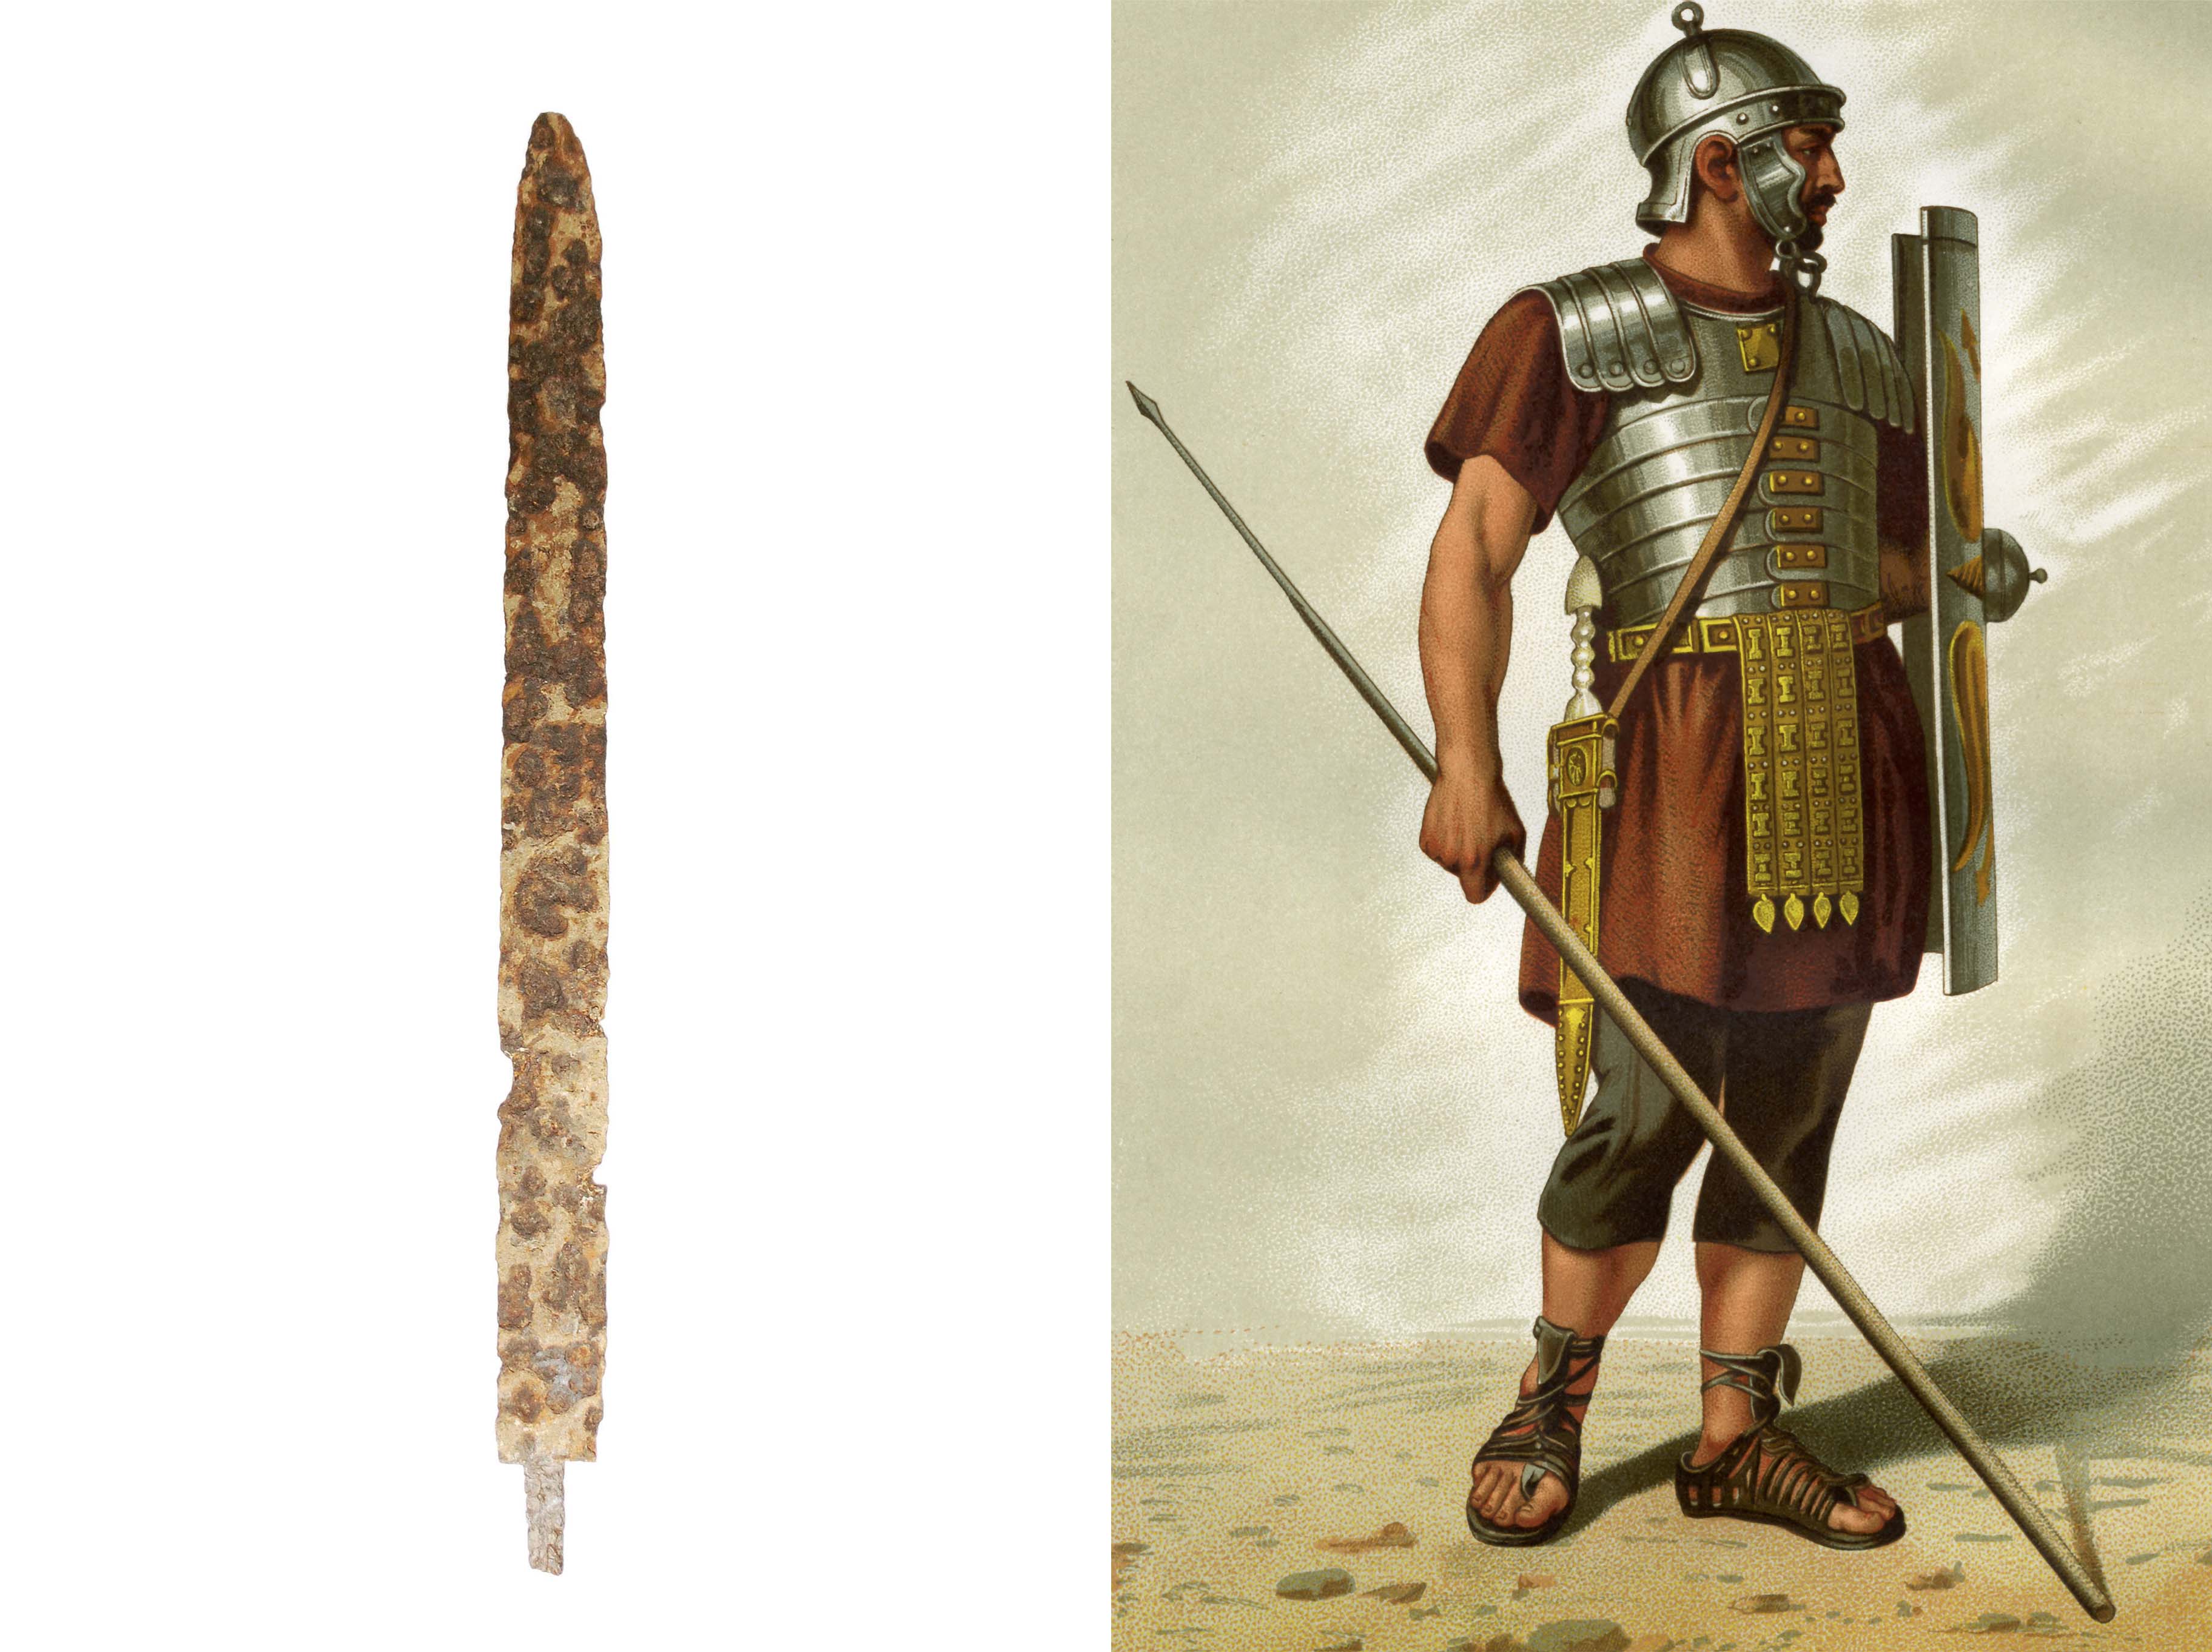 The spatha (left) was a long, straight sword preferred by cavalry forces in contrast to the famed Roman gladius (shown right), a short sword designed for thrusting in close combat. / British Museum / Alamy